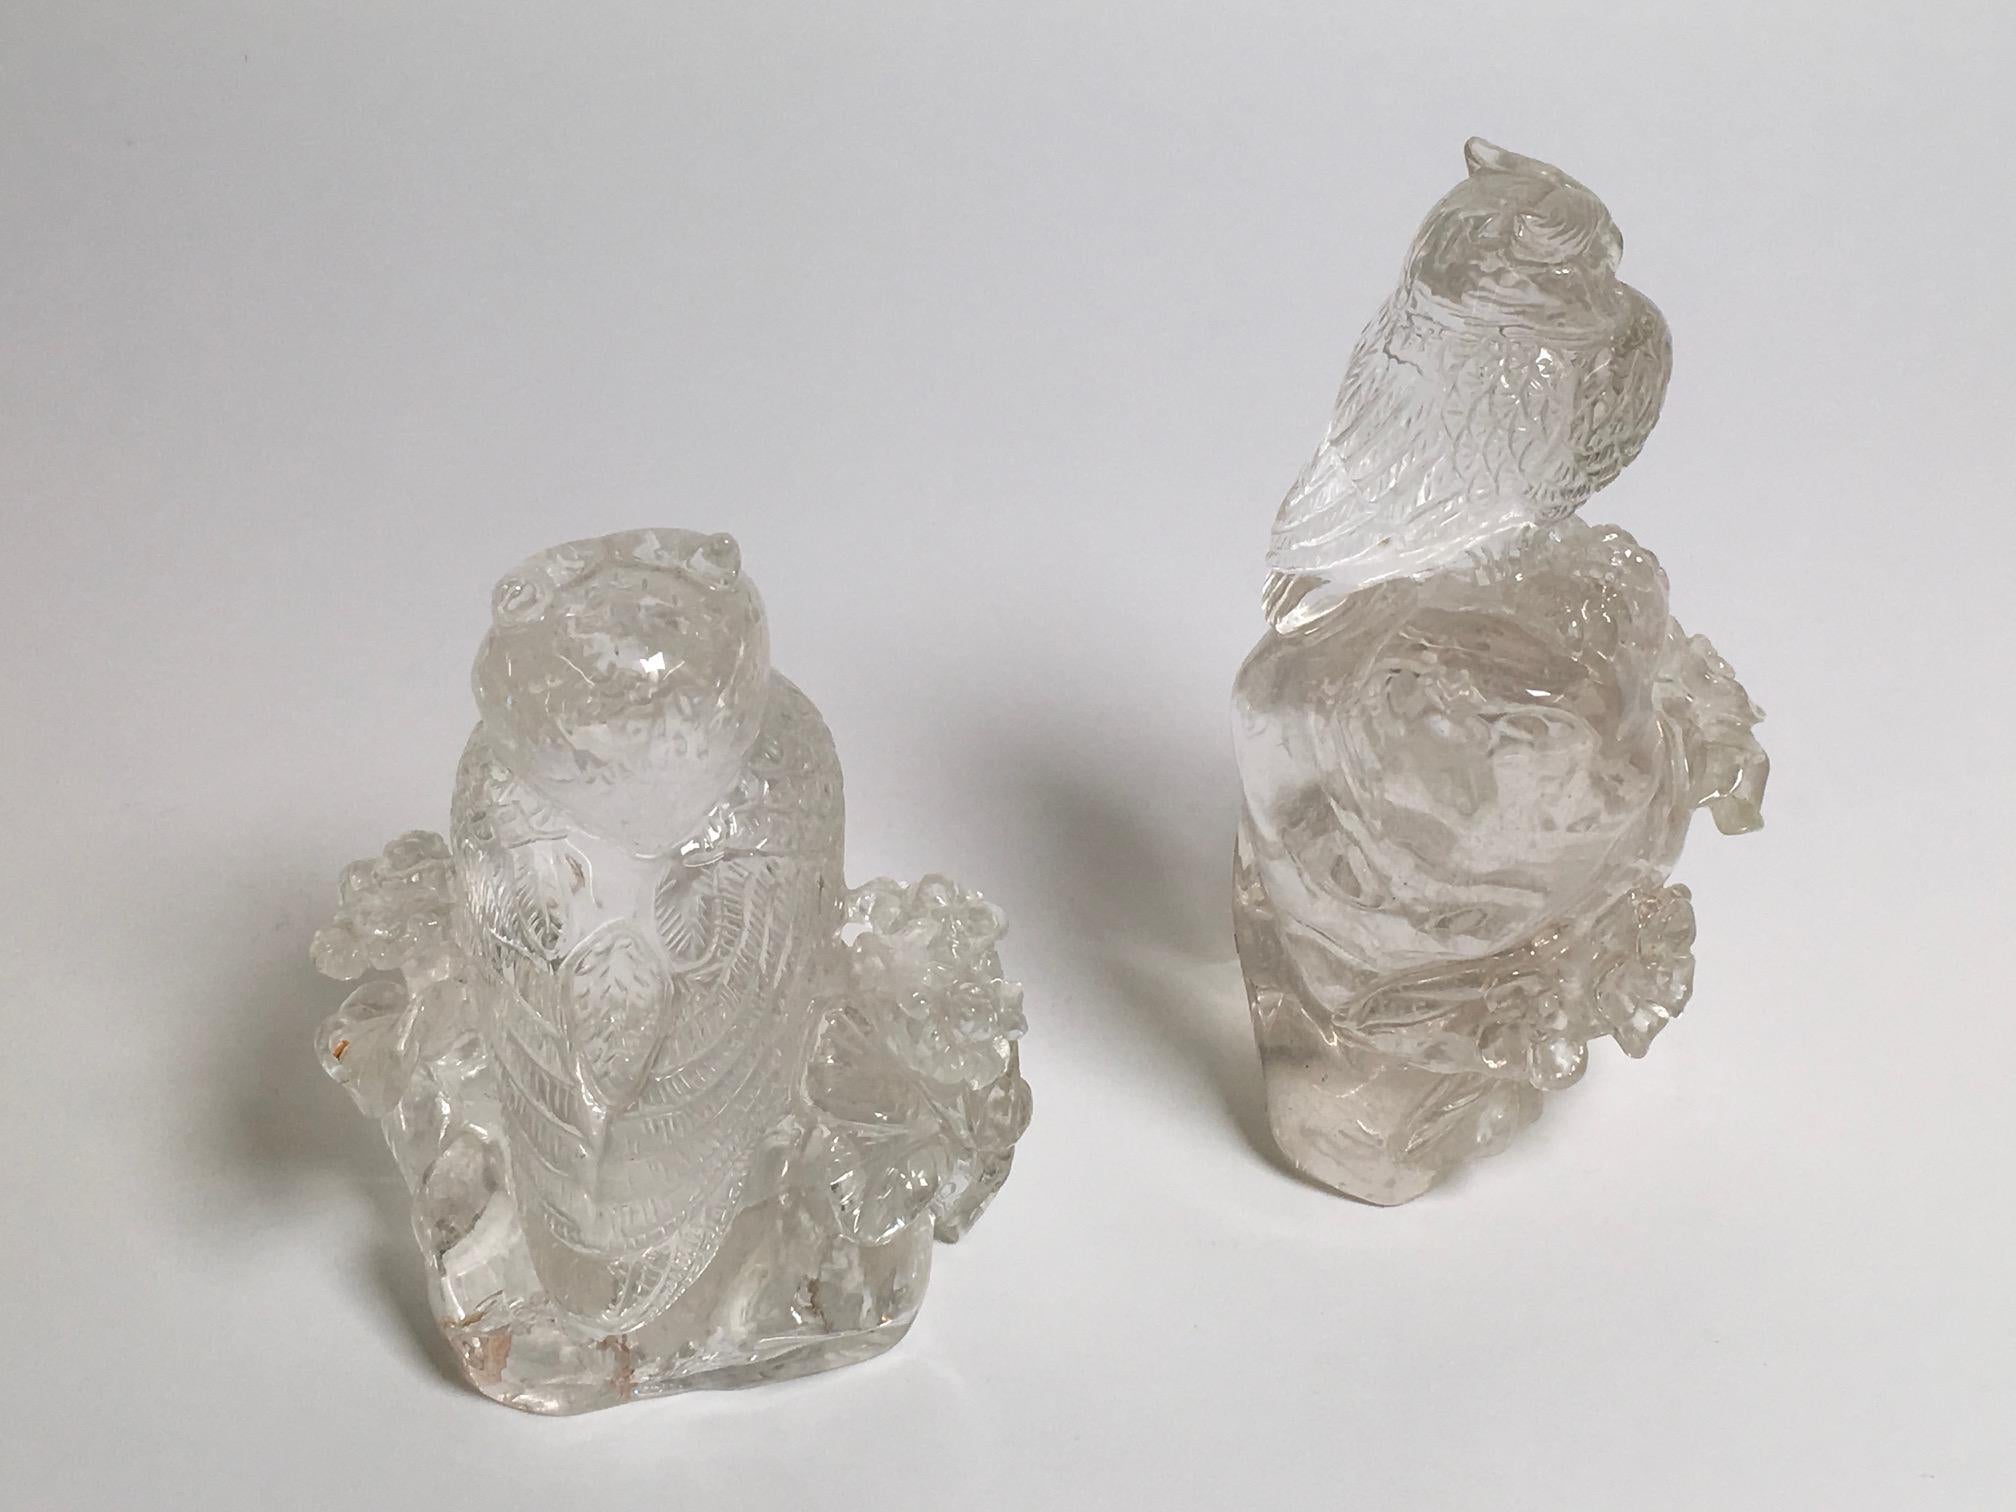 Beautiful Carved Hyaline Quartz ‘Rock Crystal’ Sculptures In Excellent Condition For Sale In Milan, Italy